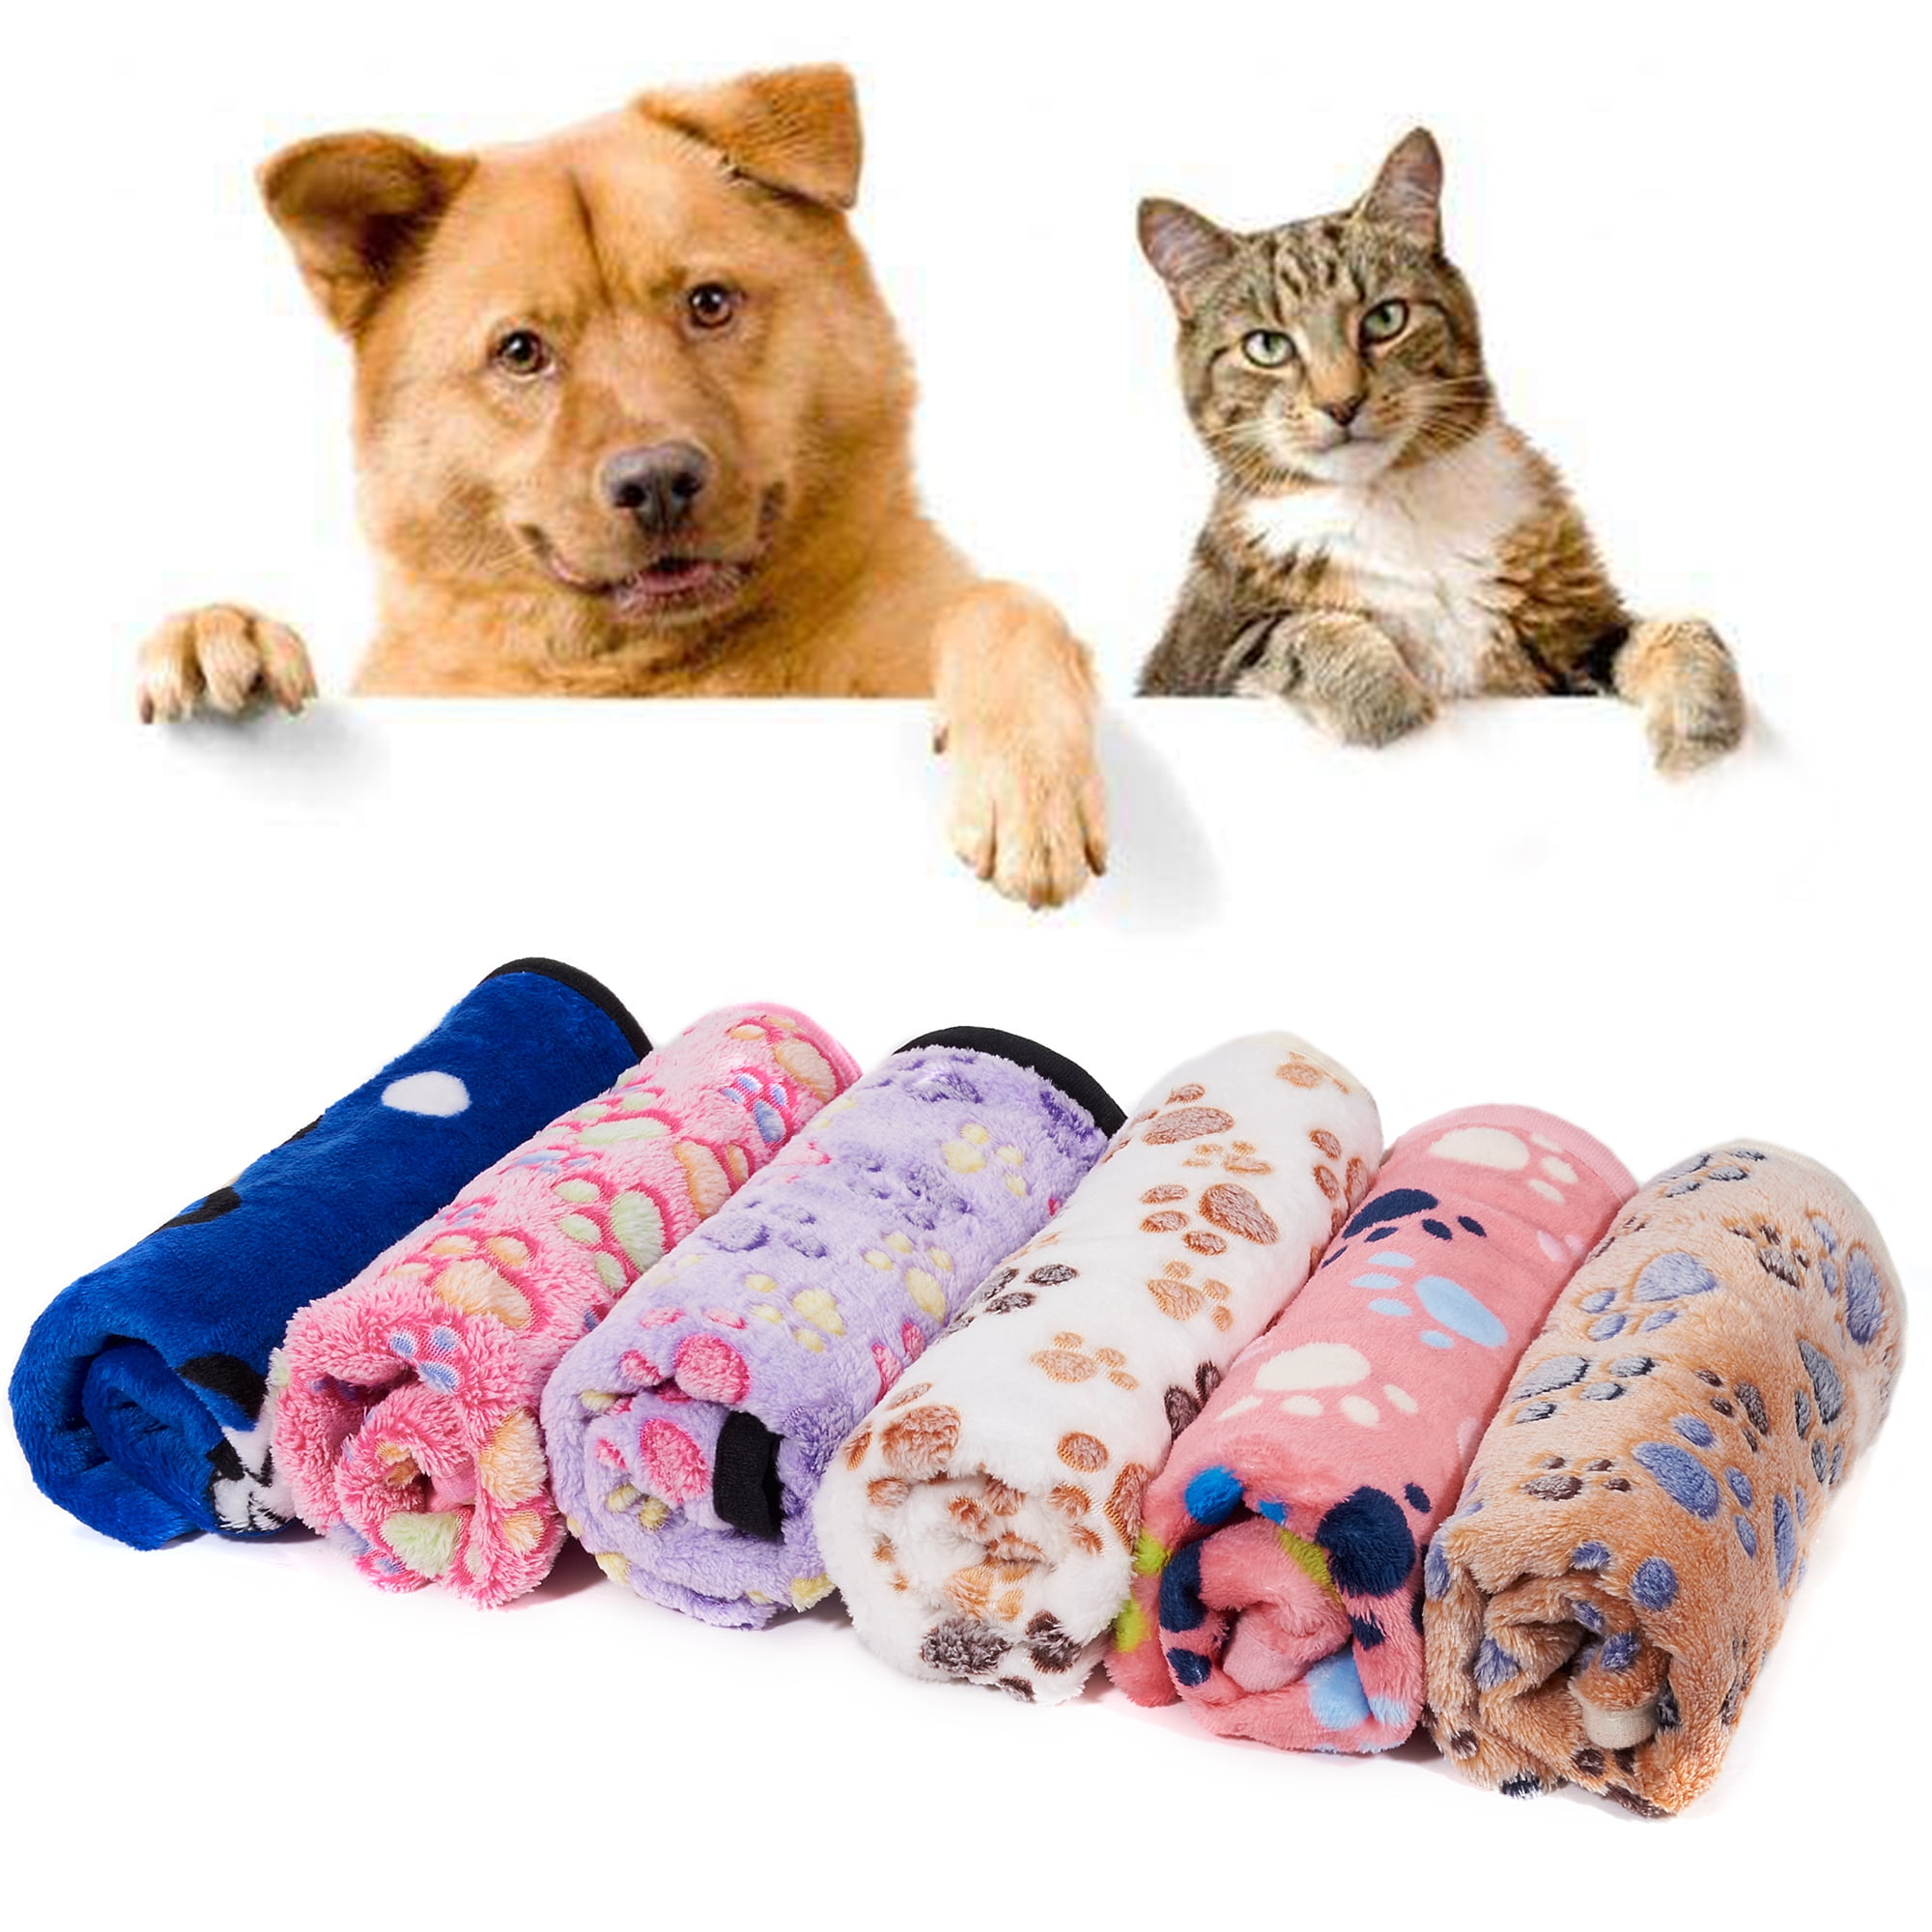 Yukio Pet Blanket Warm Dog Cat Fleece Blankets Sleep Mat Pad Bed Cover Soft Blanket for Kitten Puppy and Other Small Animals 